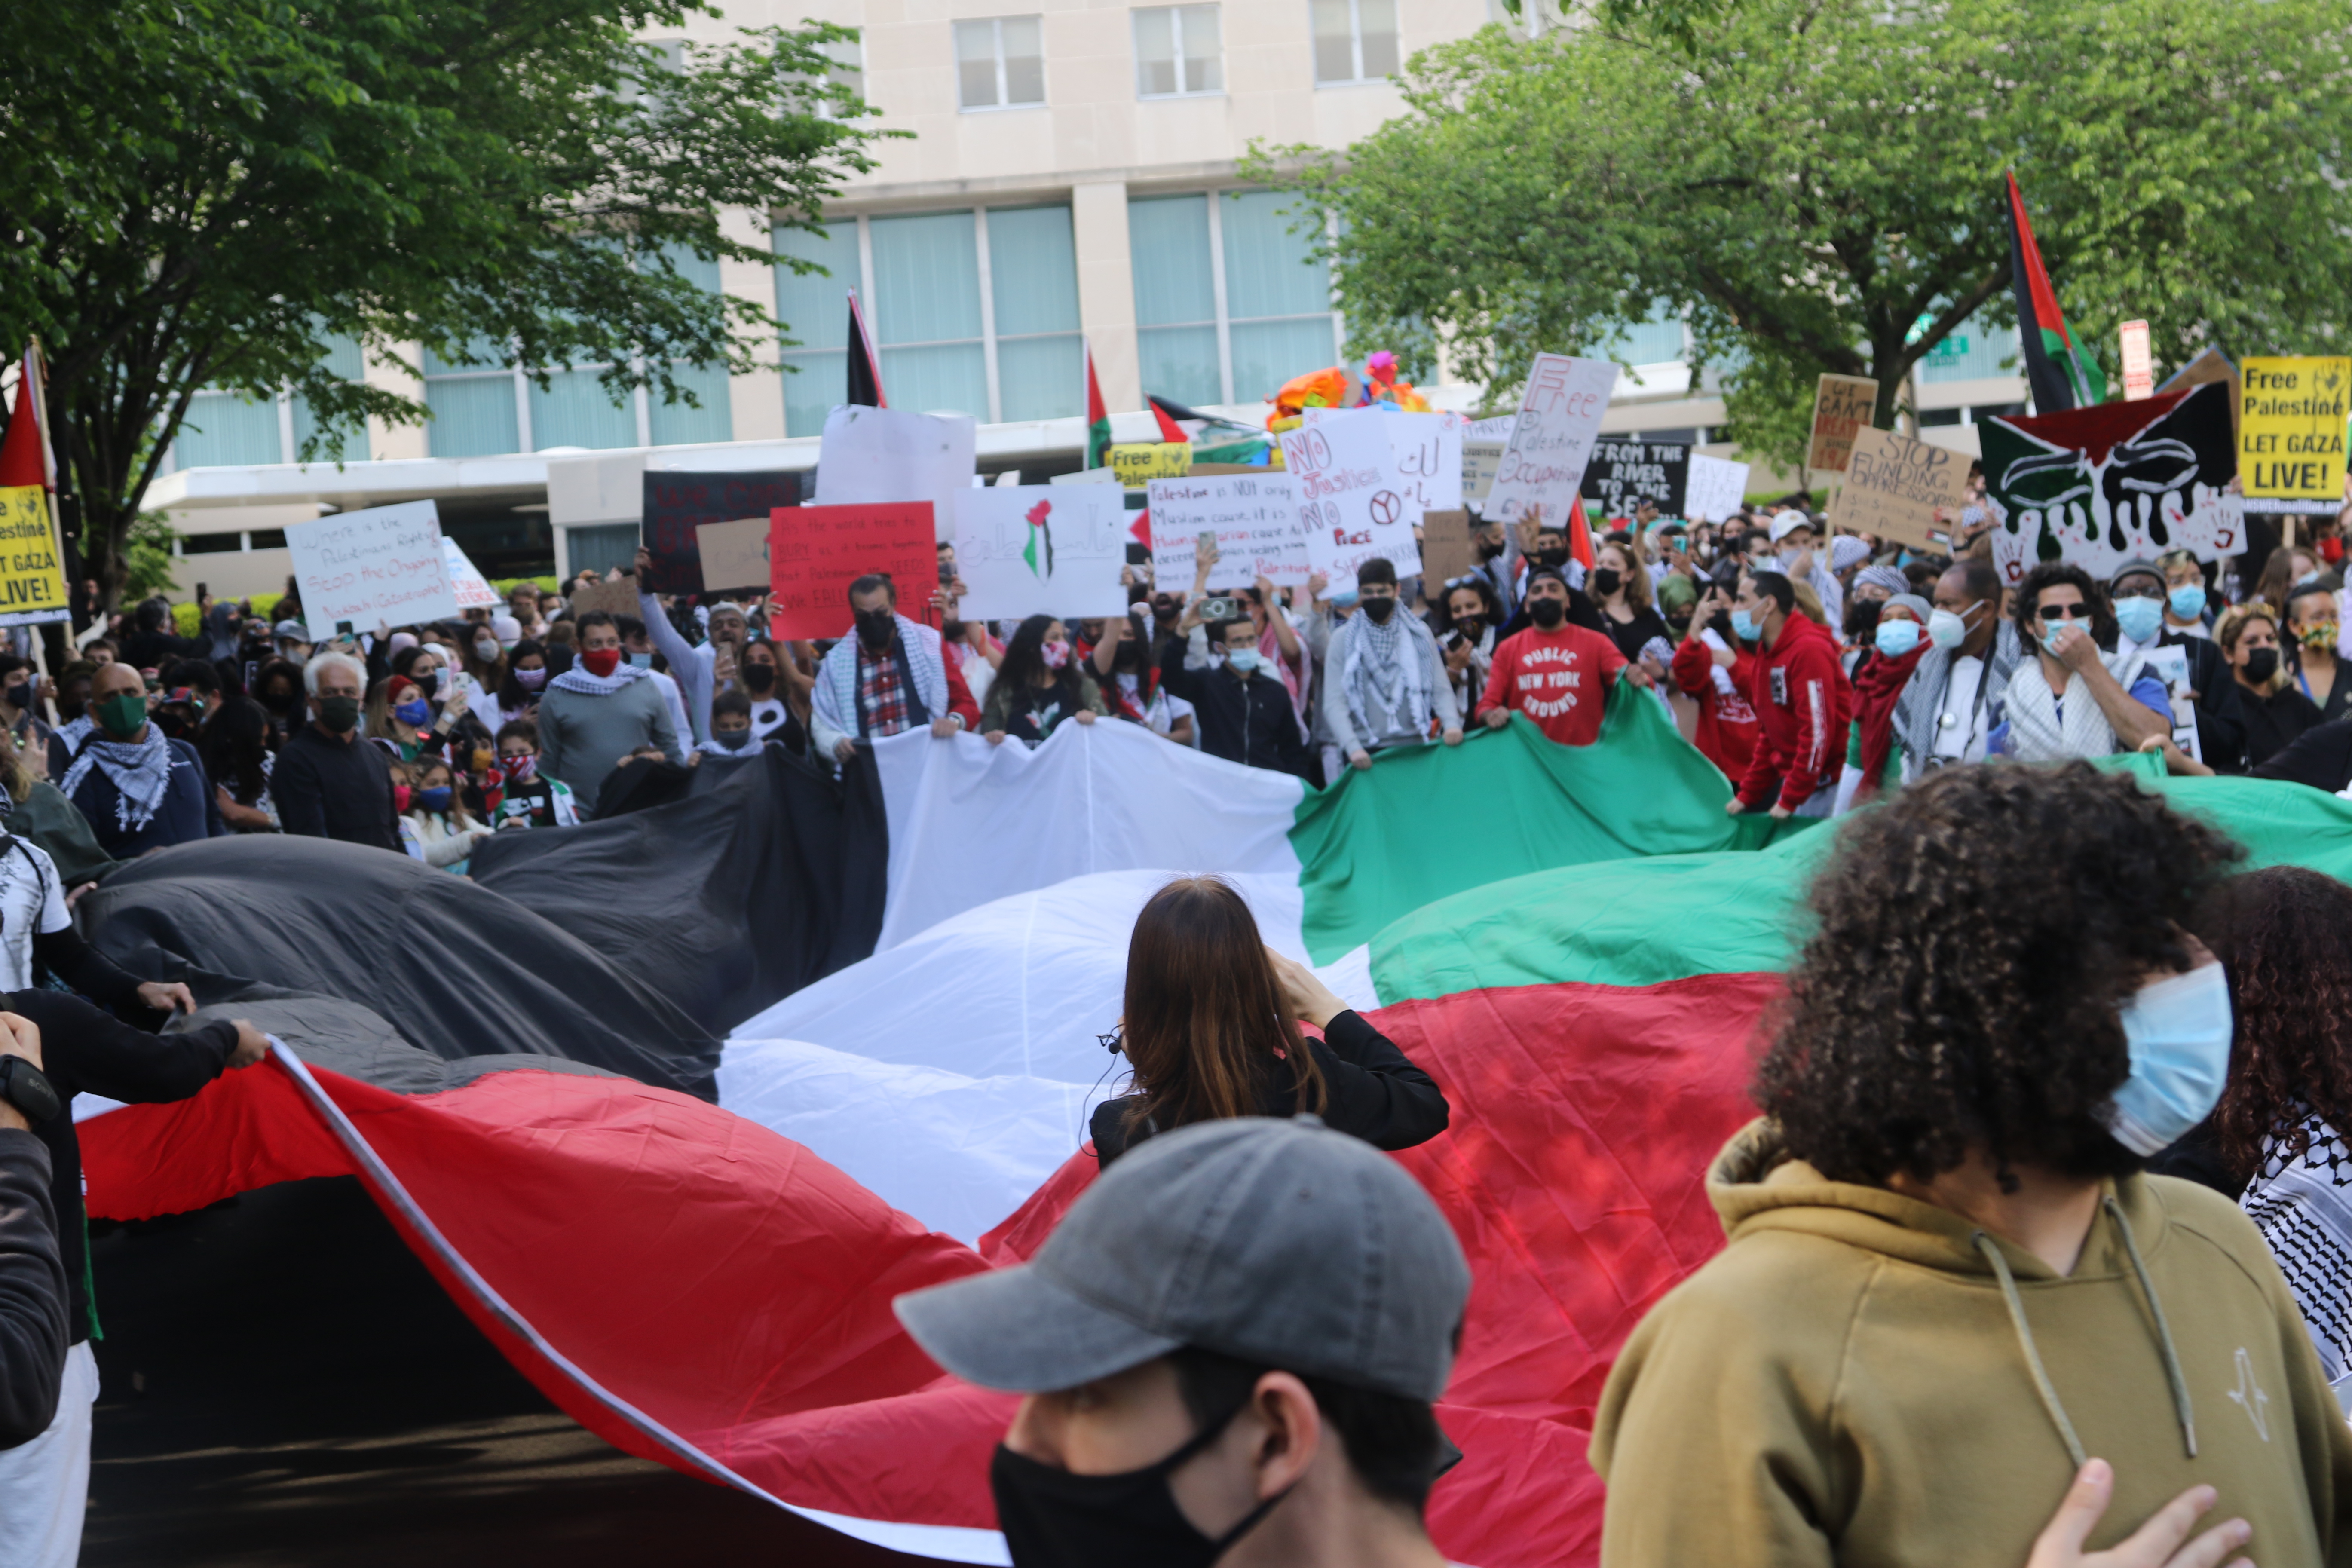 Hundreds of demonstrators gathered in front of the State Department in Washington DC on Tuesday afternoon, calling on the administration of US President Joe Biden to pressure Israel to stop the planned evictions in Sheikh Jarrah